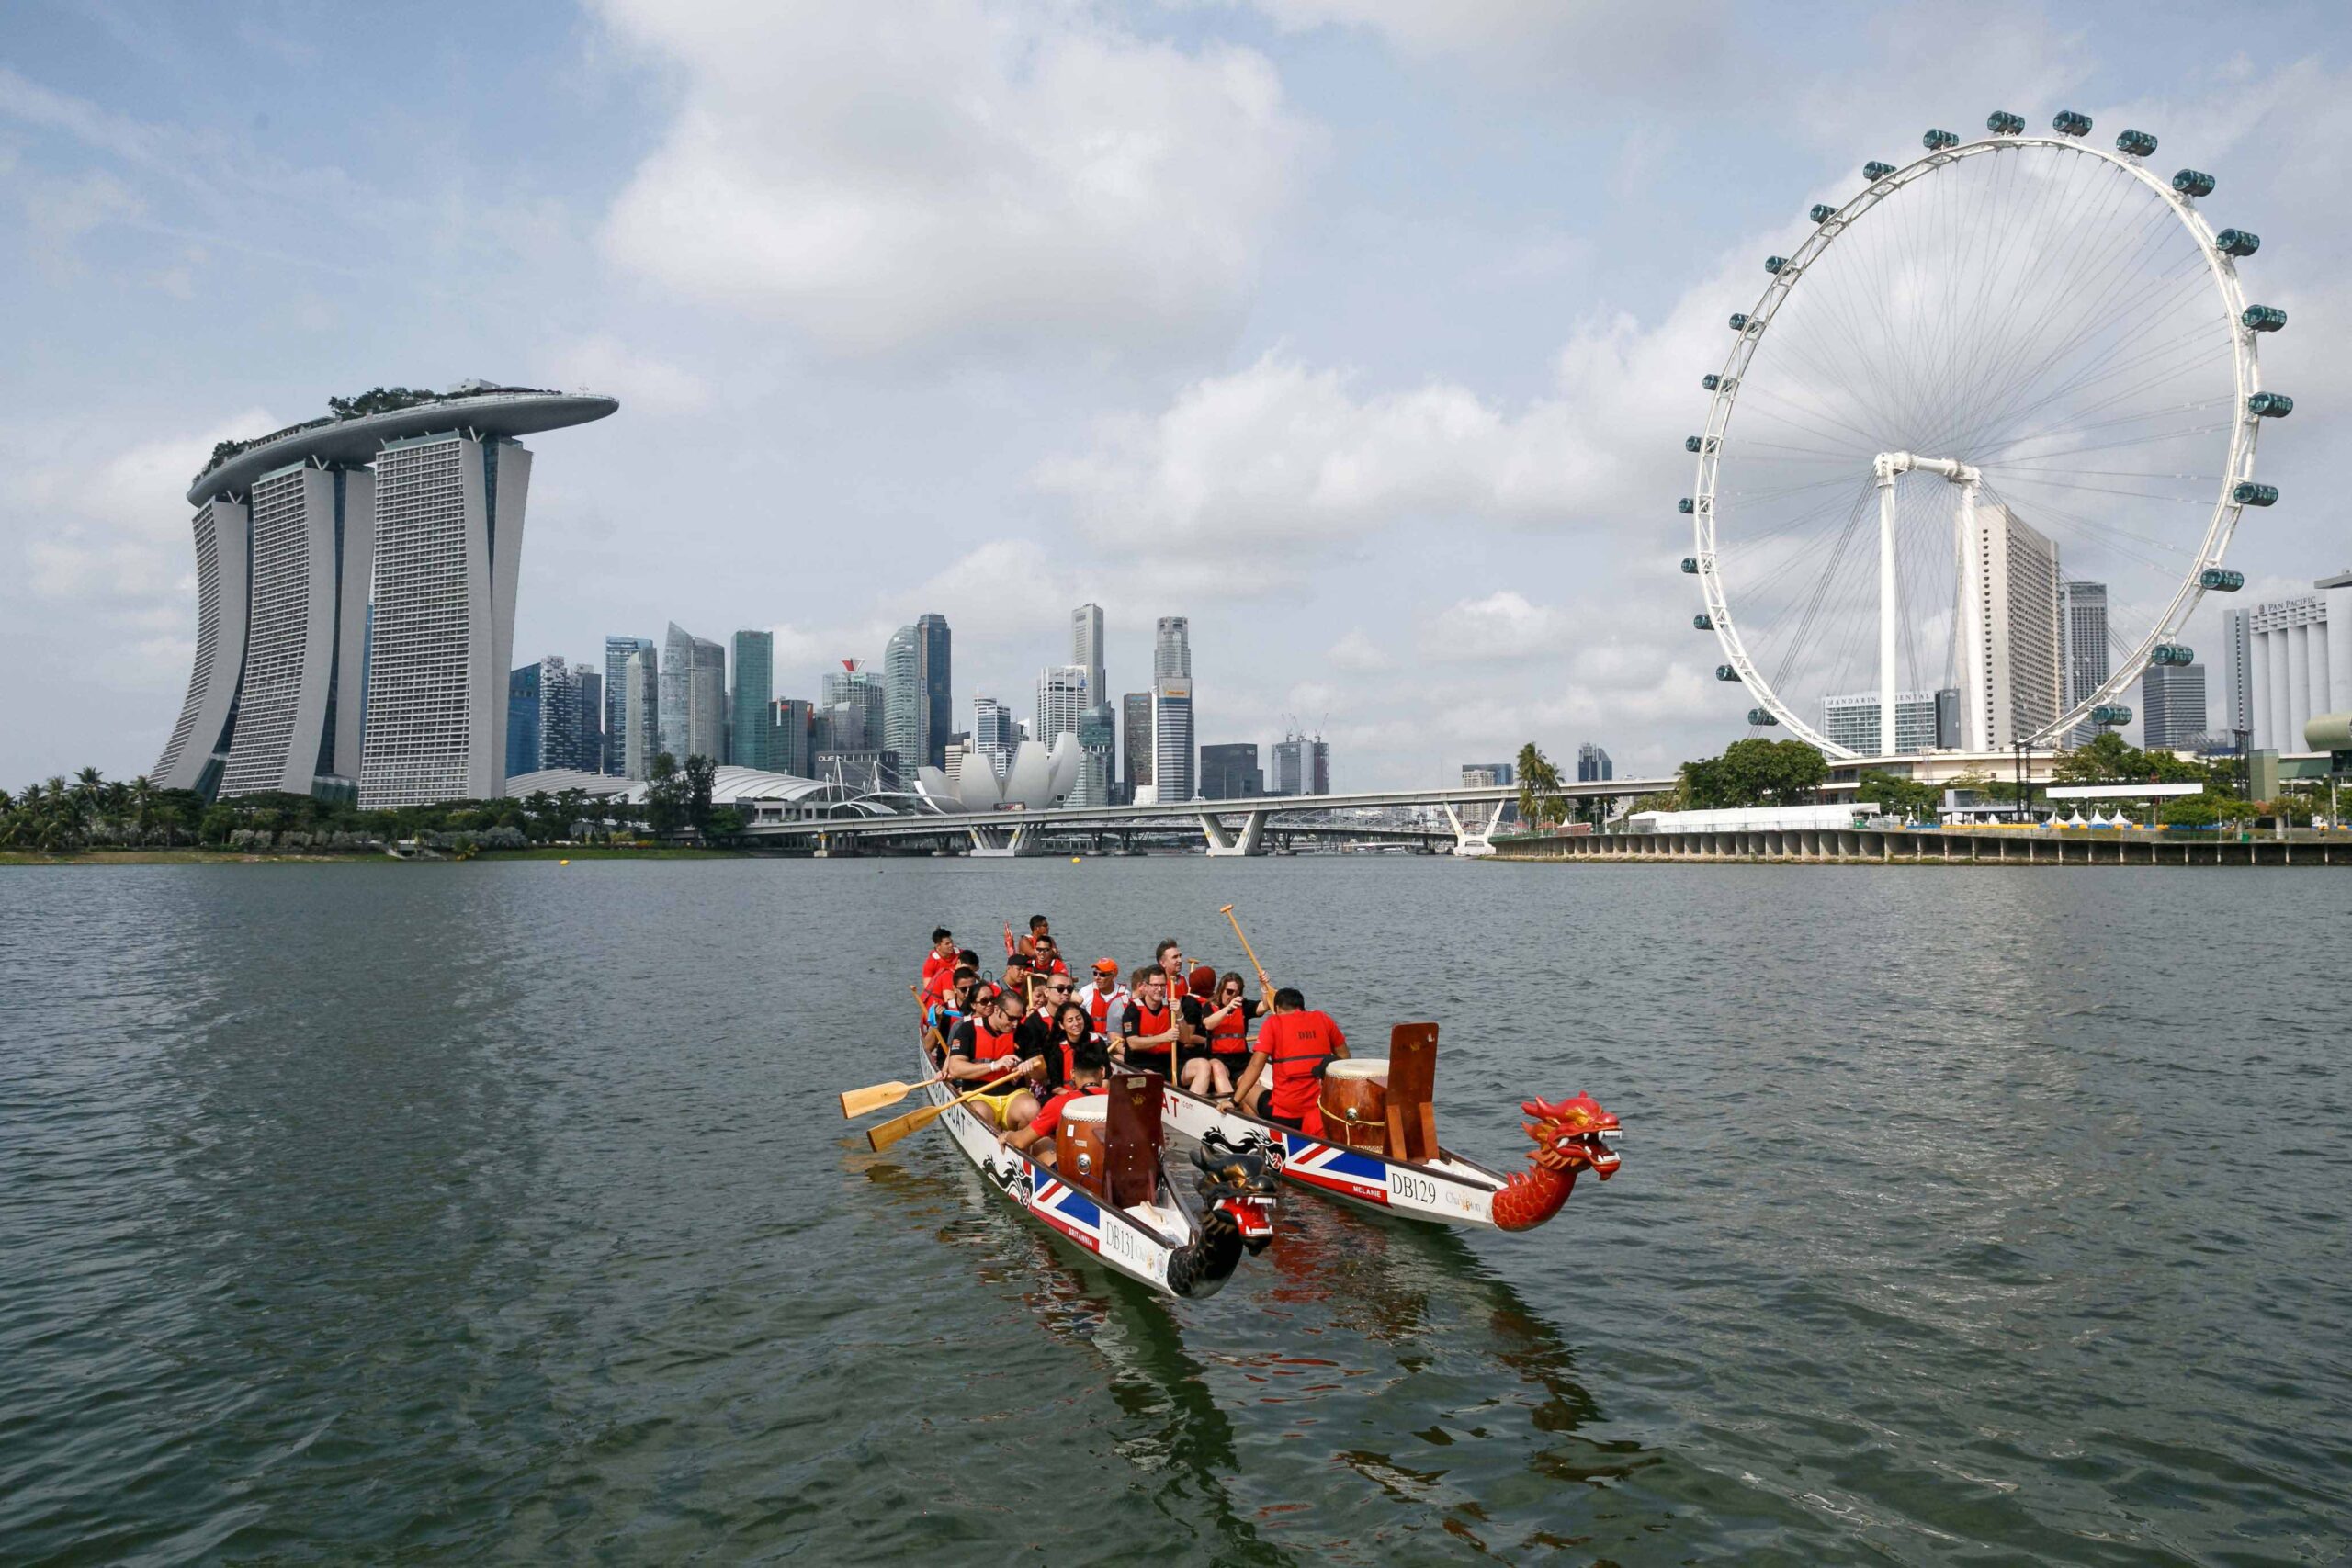 Attendees on a company retreat in Singapore enjoy a boat ride with landmarks in the background. The rule of thirds is used by the event photographer to make a compelling image.